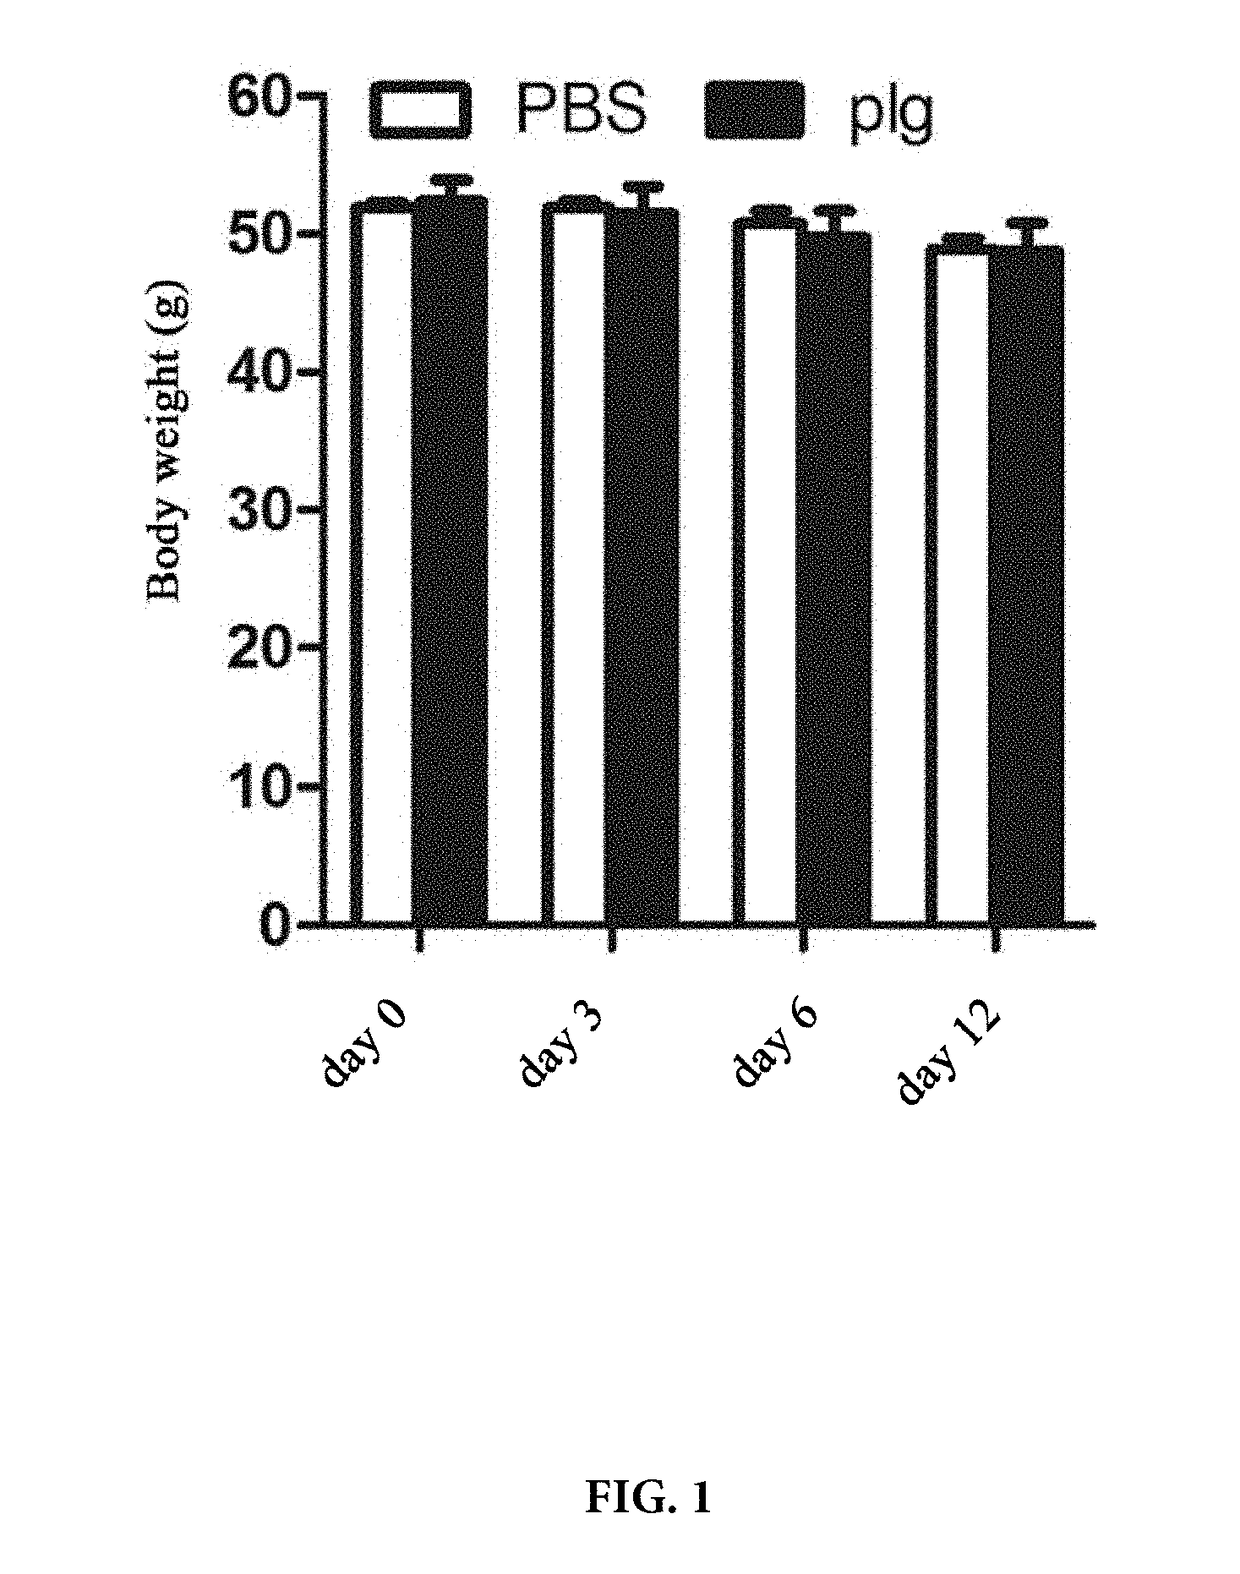 Method for preventing or treating diabetes mellitus nerve injury and related diseases